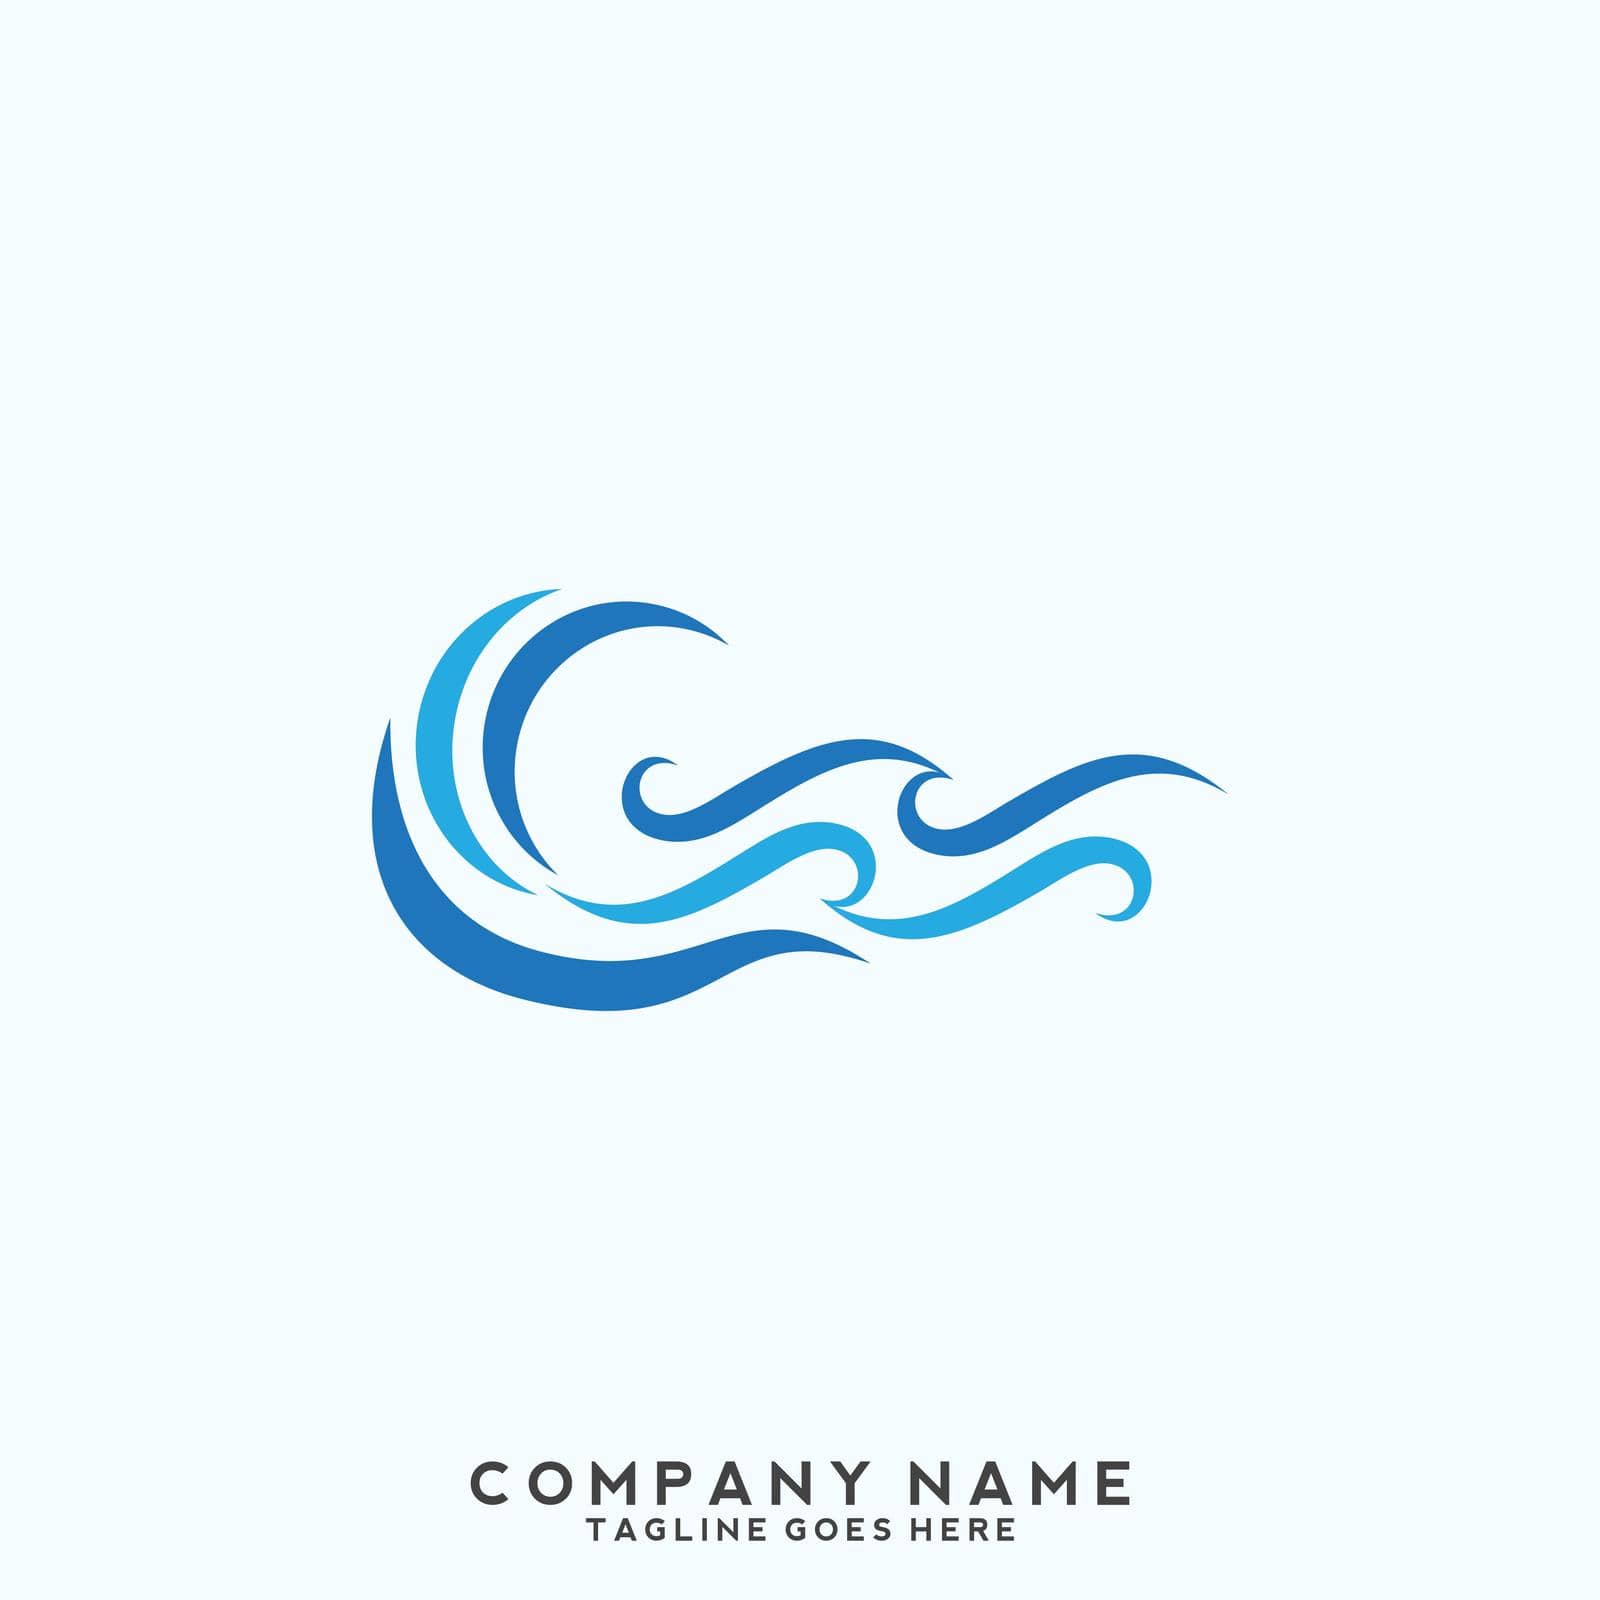 Water Wave symbol and icon Logo Template vector by liaanniesatul